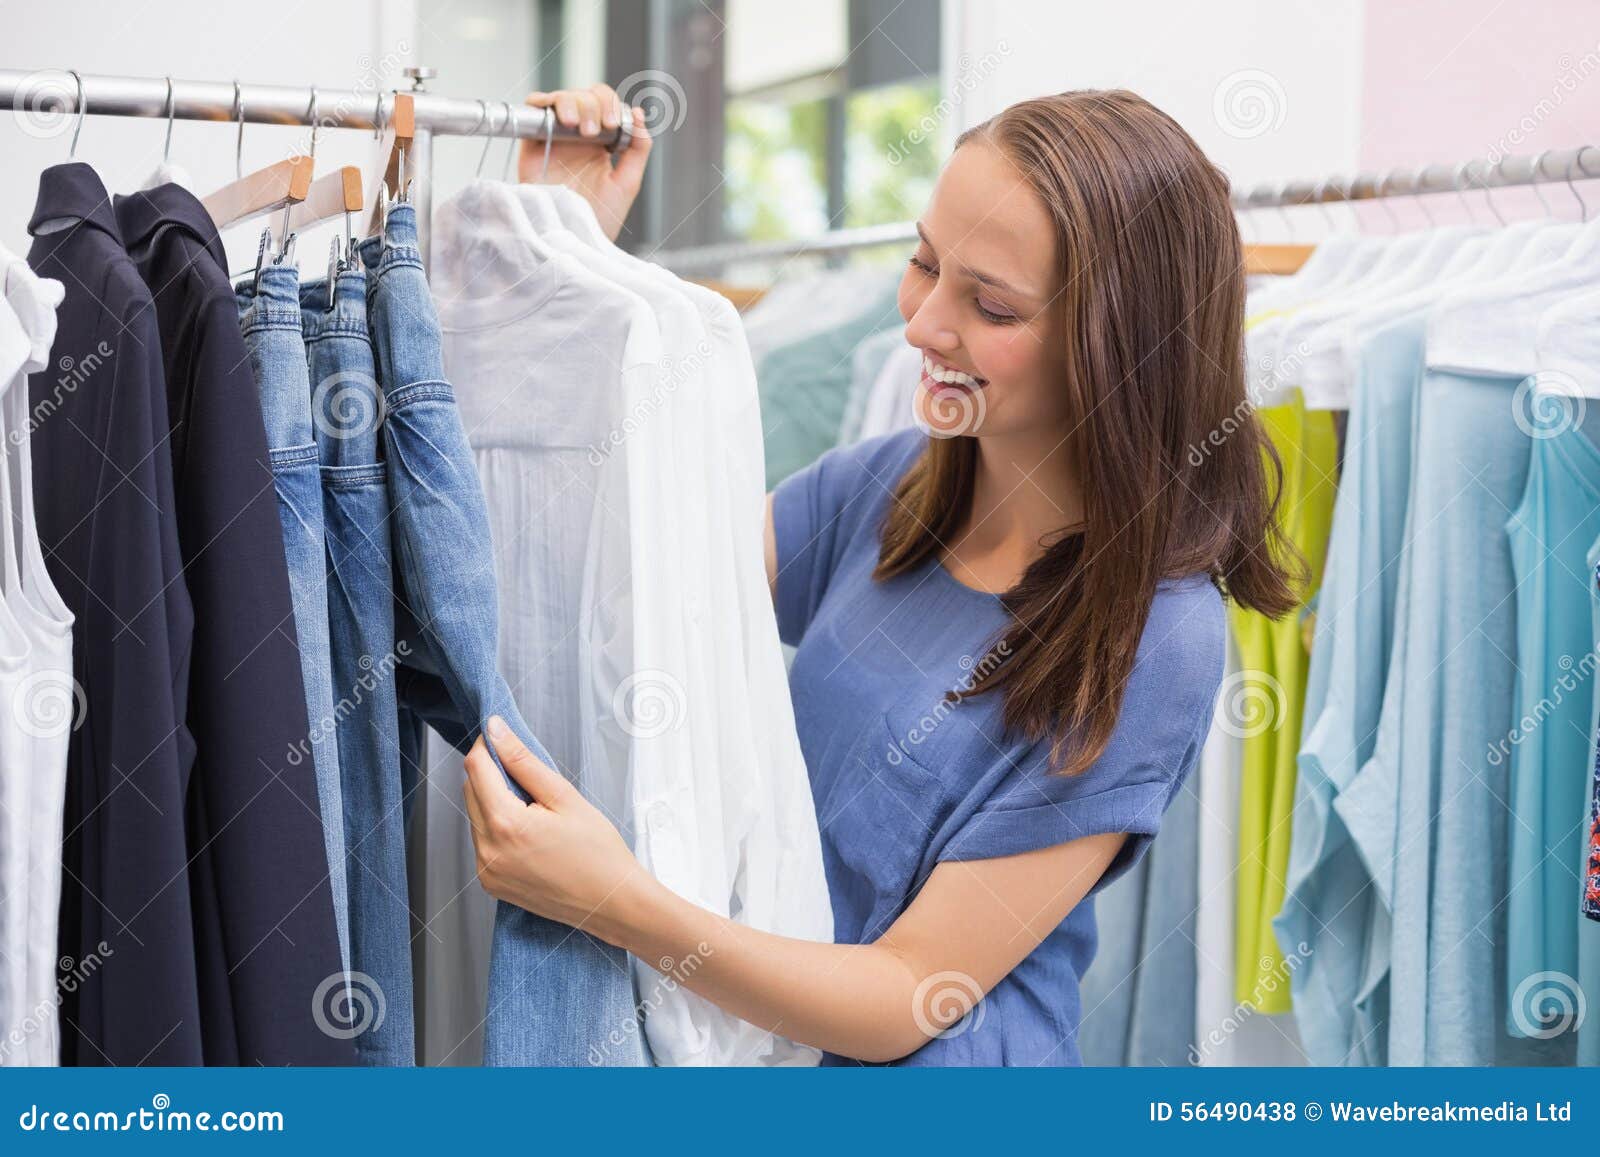 Pretty Brunette Browsing in the Clothes Rack Stock Photo - Image of ...